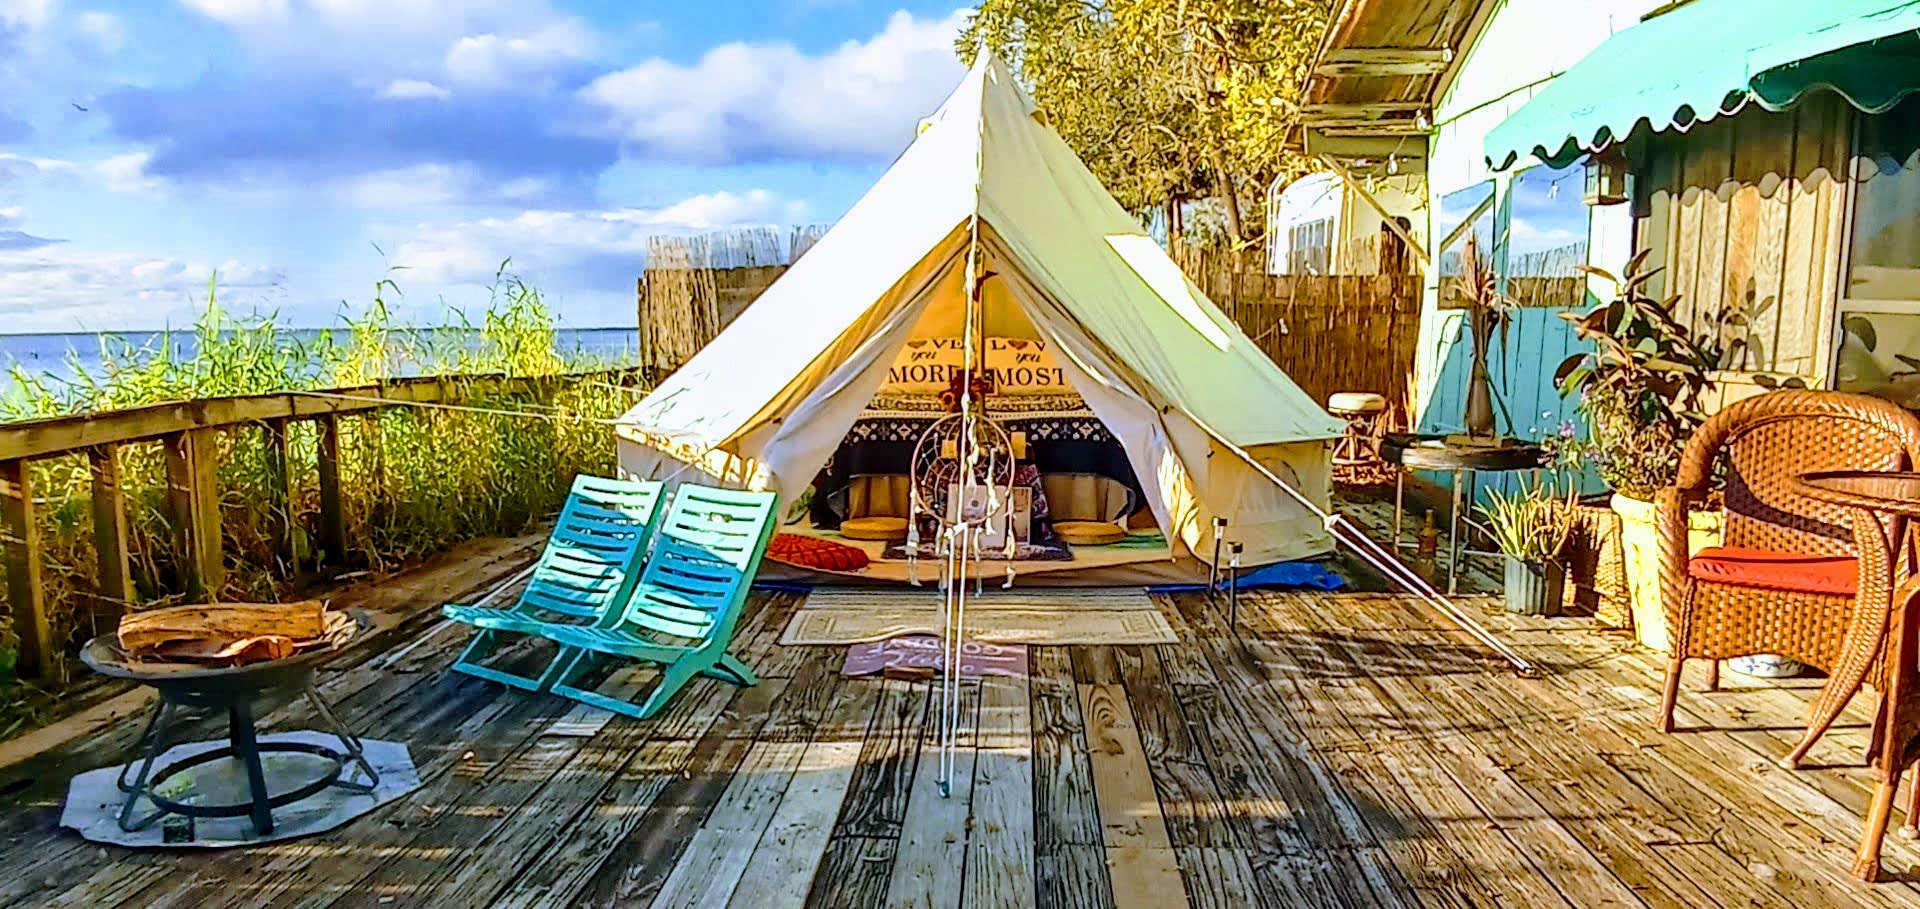 Waterfront private campsite with bistro table, Fire pit, and plenty of space for your gear!